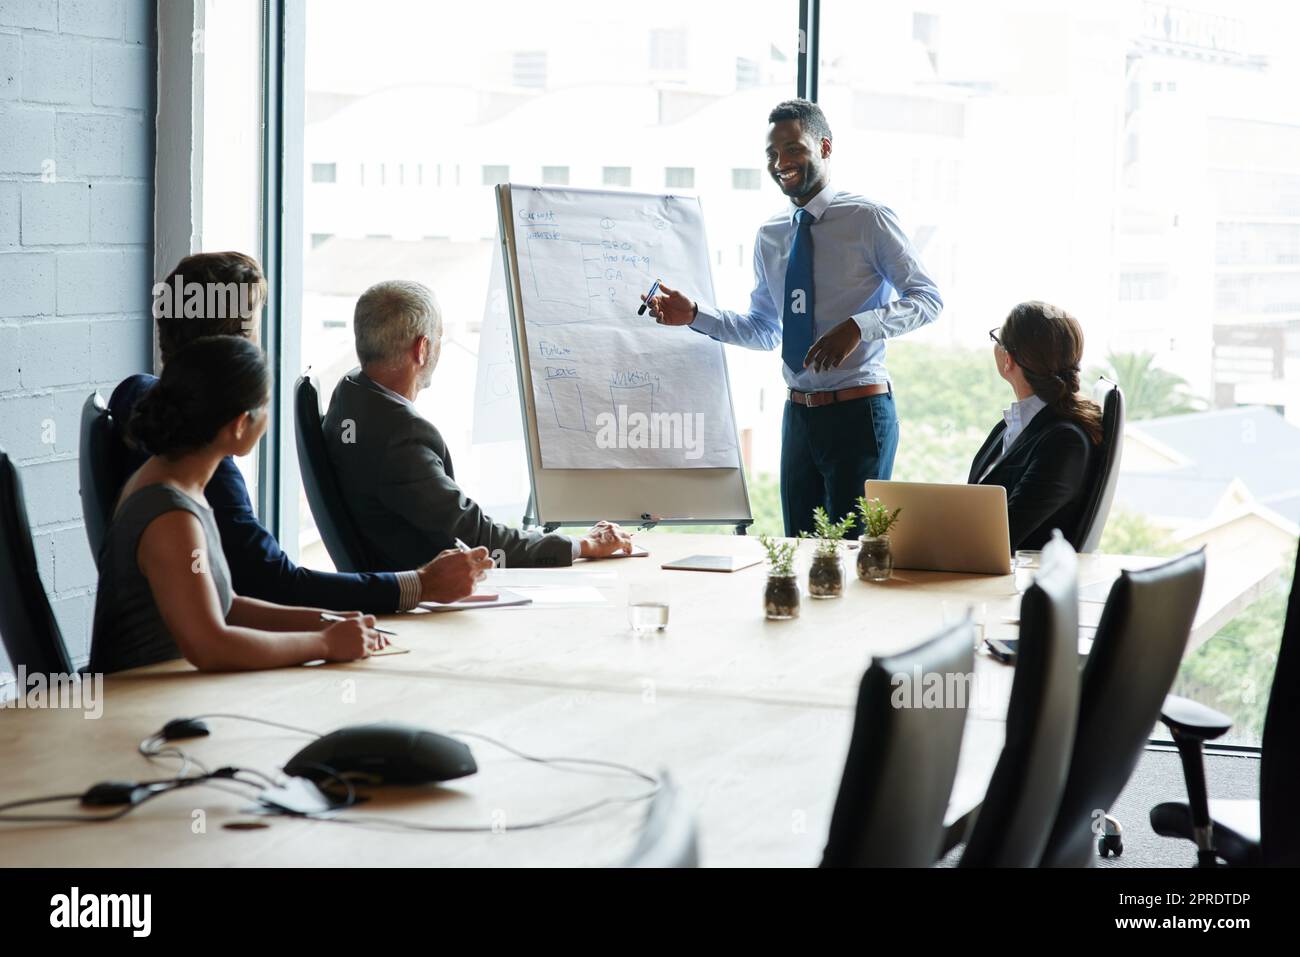 Young black man doing leadership presentation on innovation at business shareholder meeting in office. Diverse work colleague group talking about company mission and vision development strategy. Stock Photo